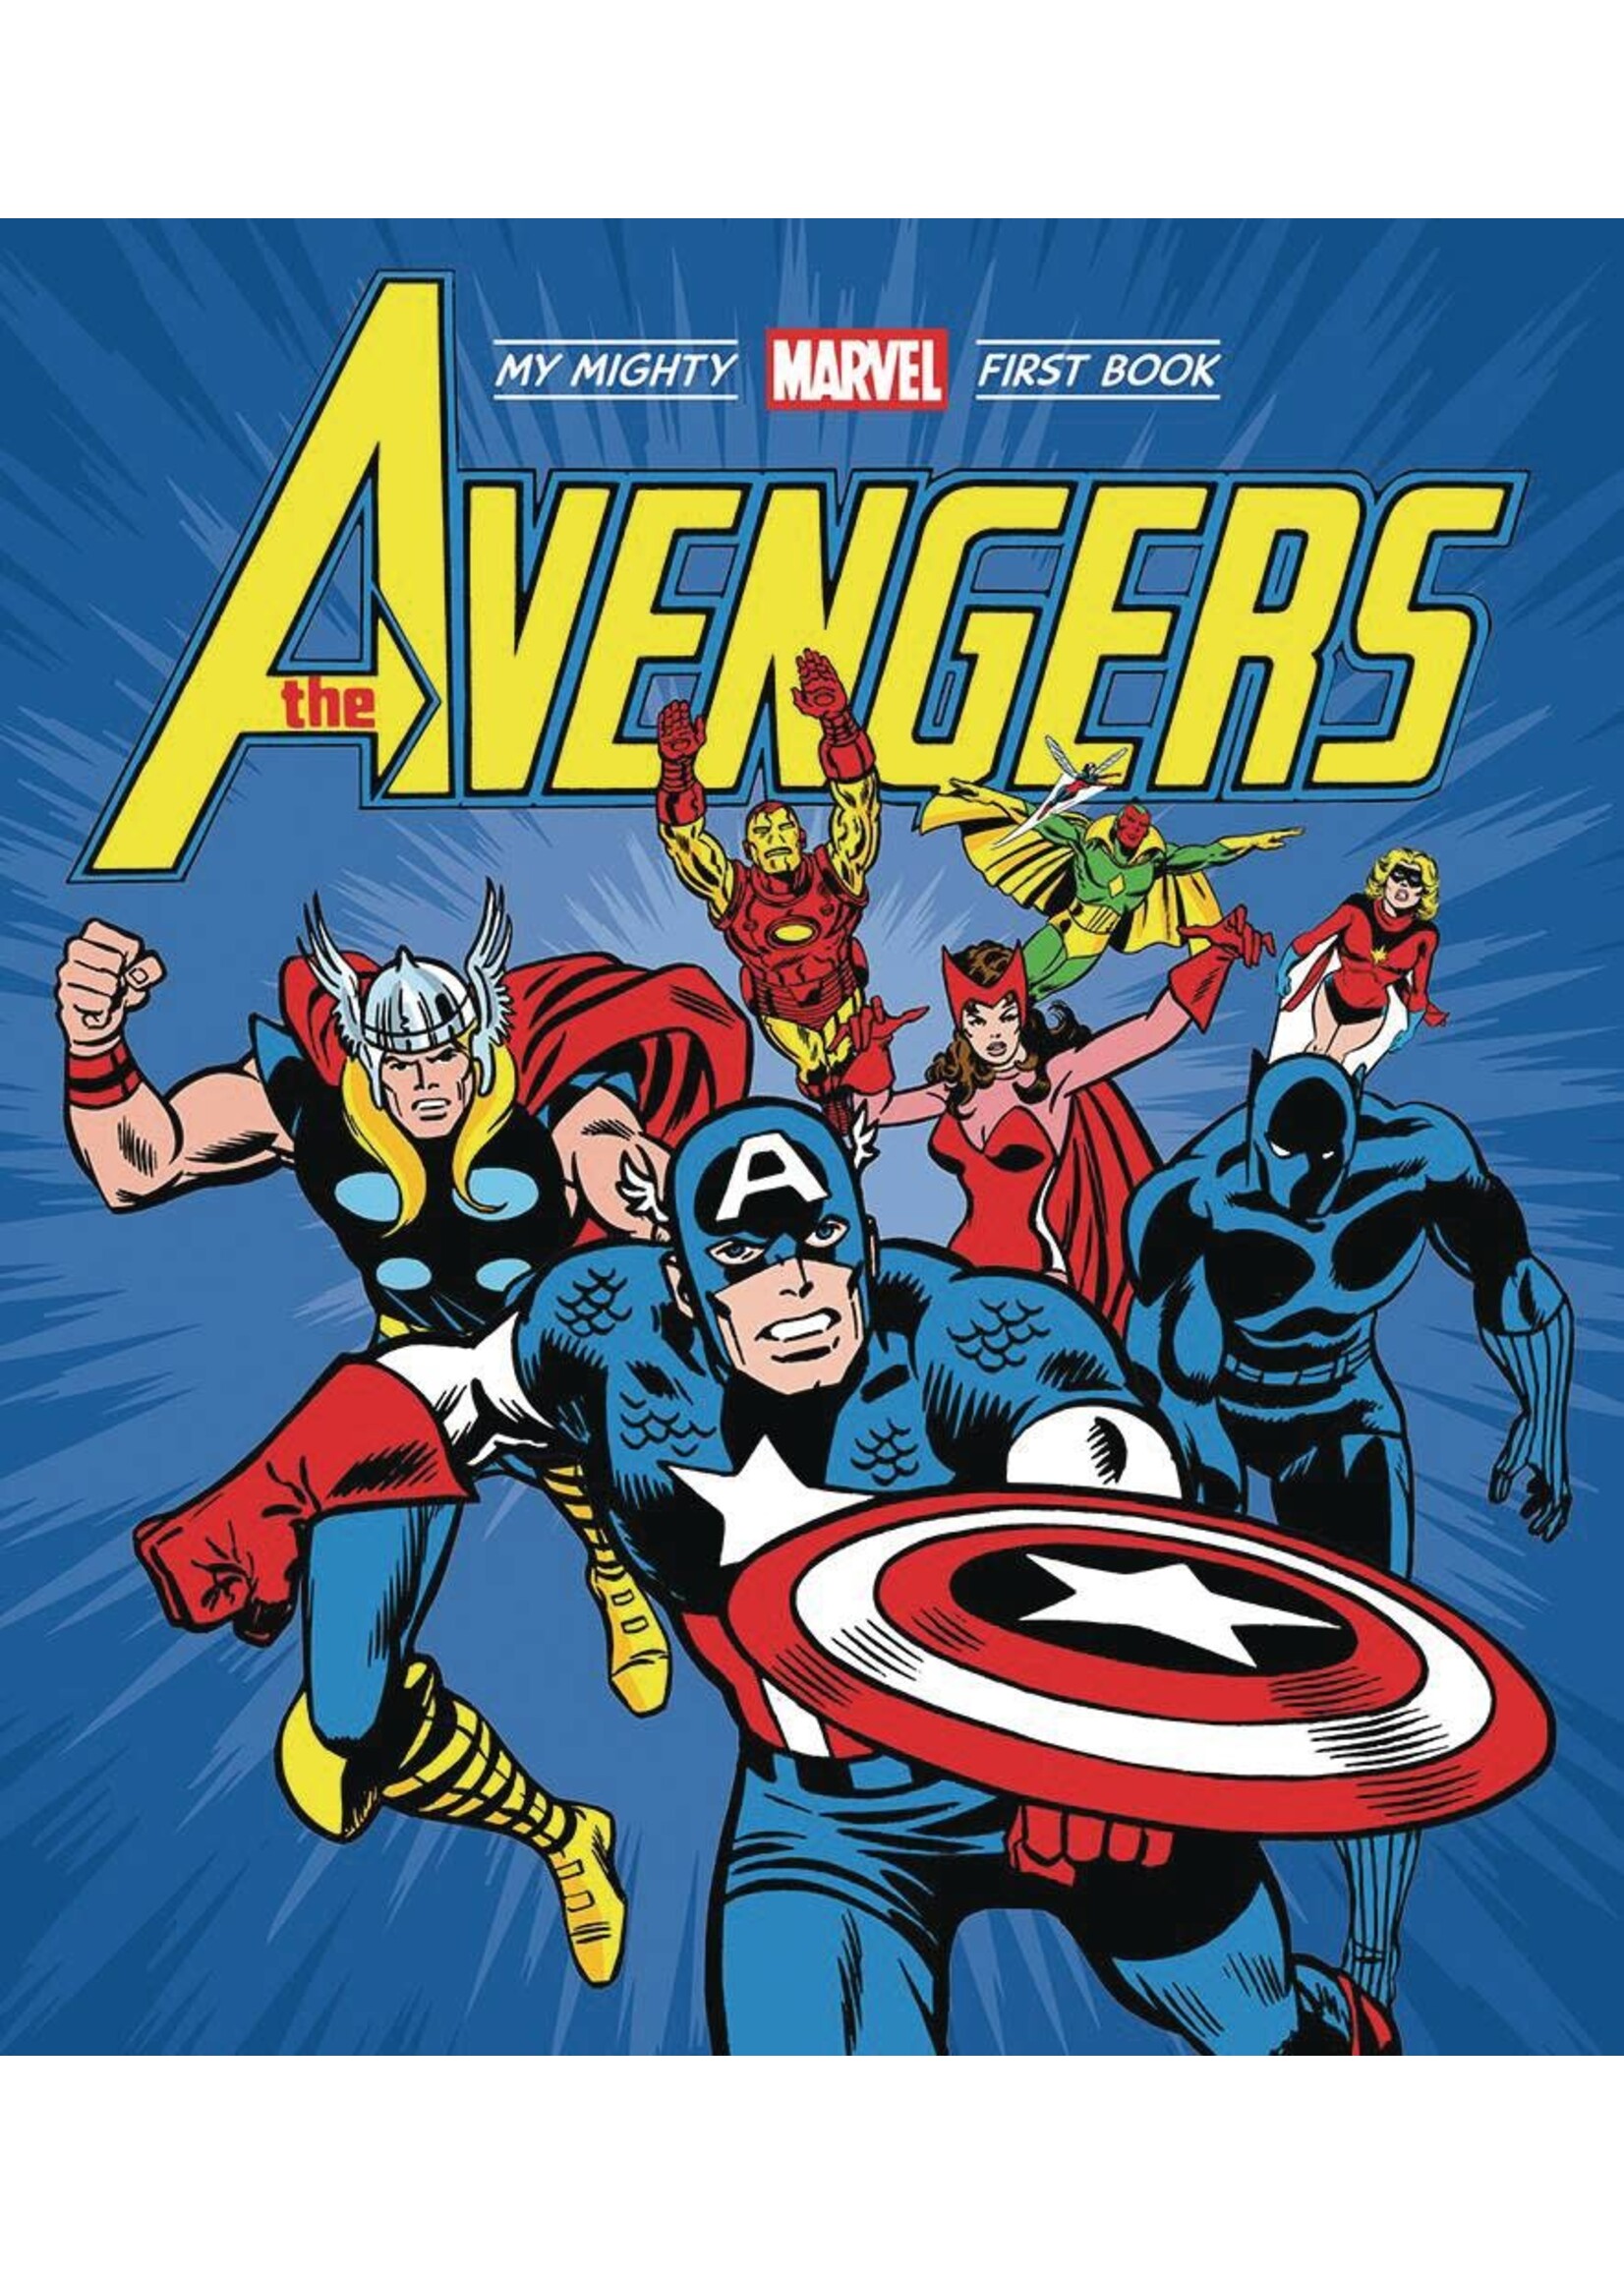 ABRAMS APPLESEED AVENGERS MY MIGHTY MARVEL FIRST BOOK BOARD BOOK